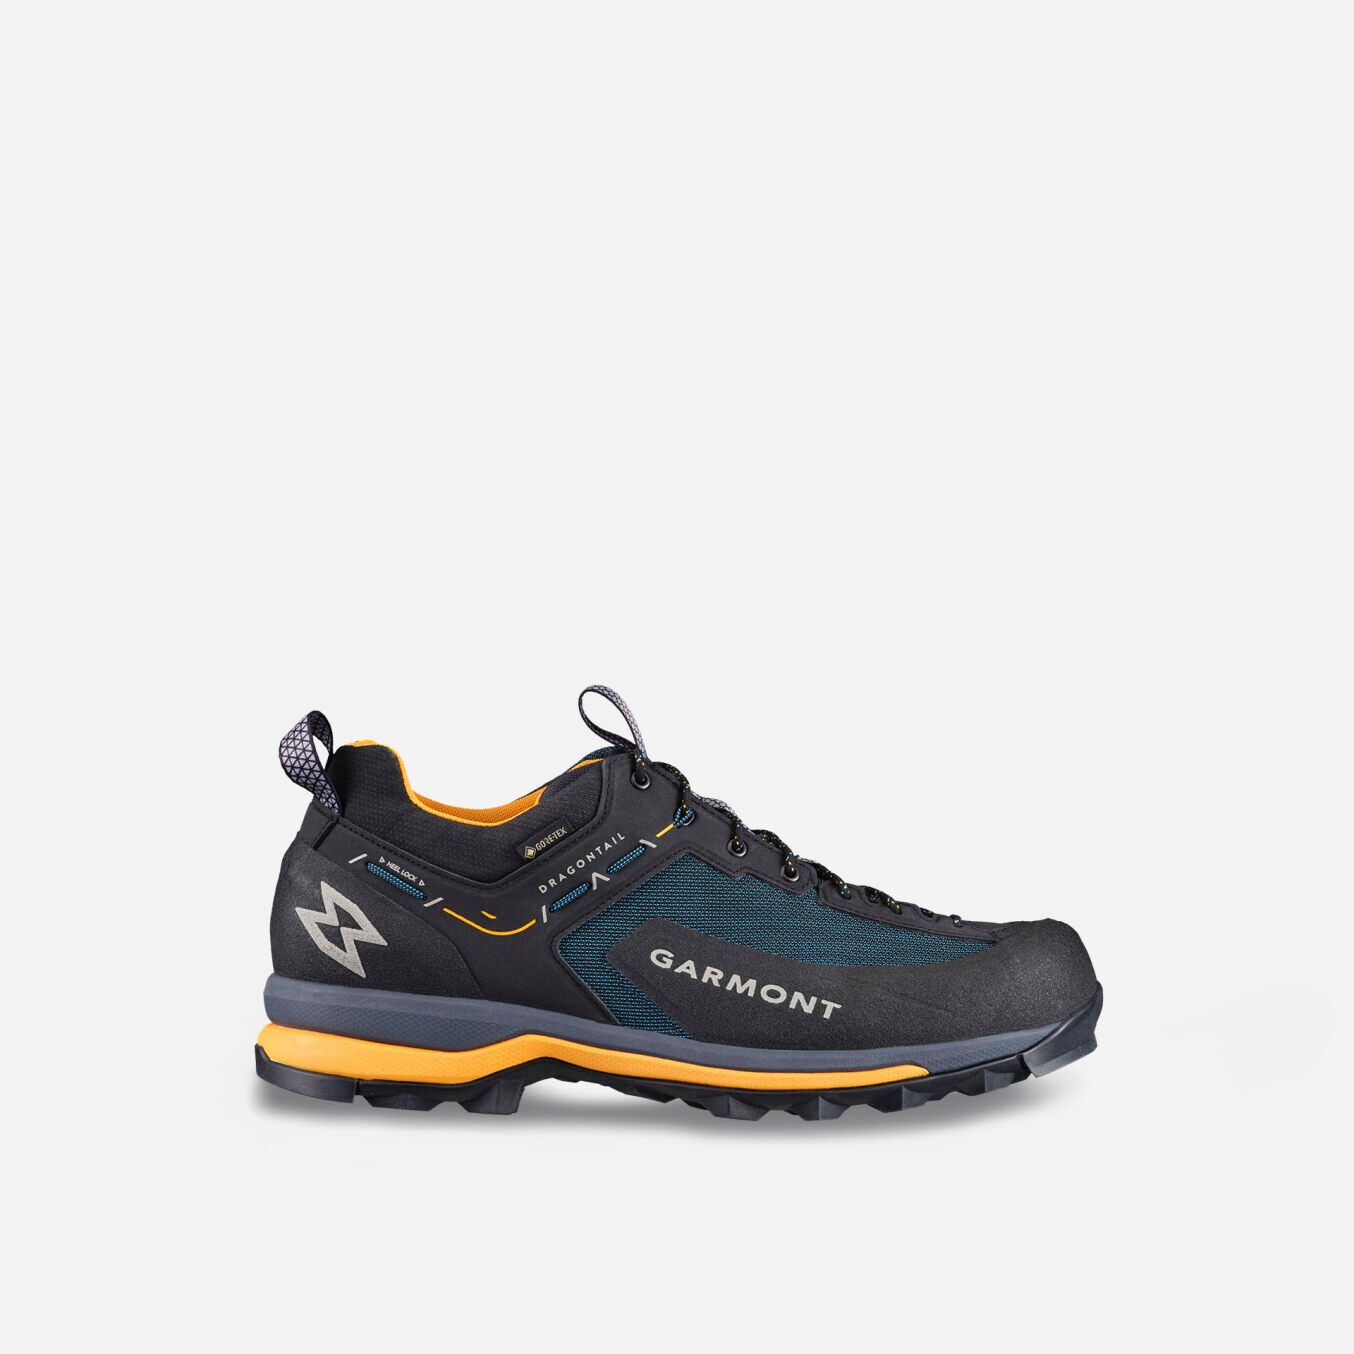 Garmont Dragontail Synth GTX - Approach shoes - Men's | Hardloop